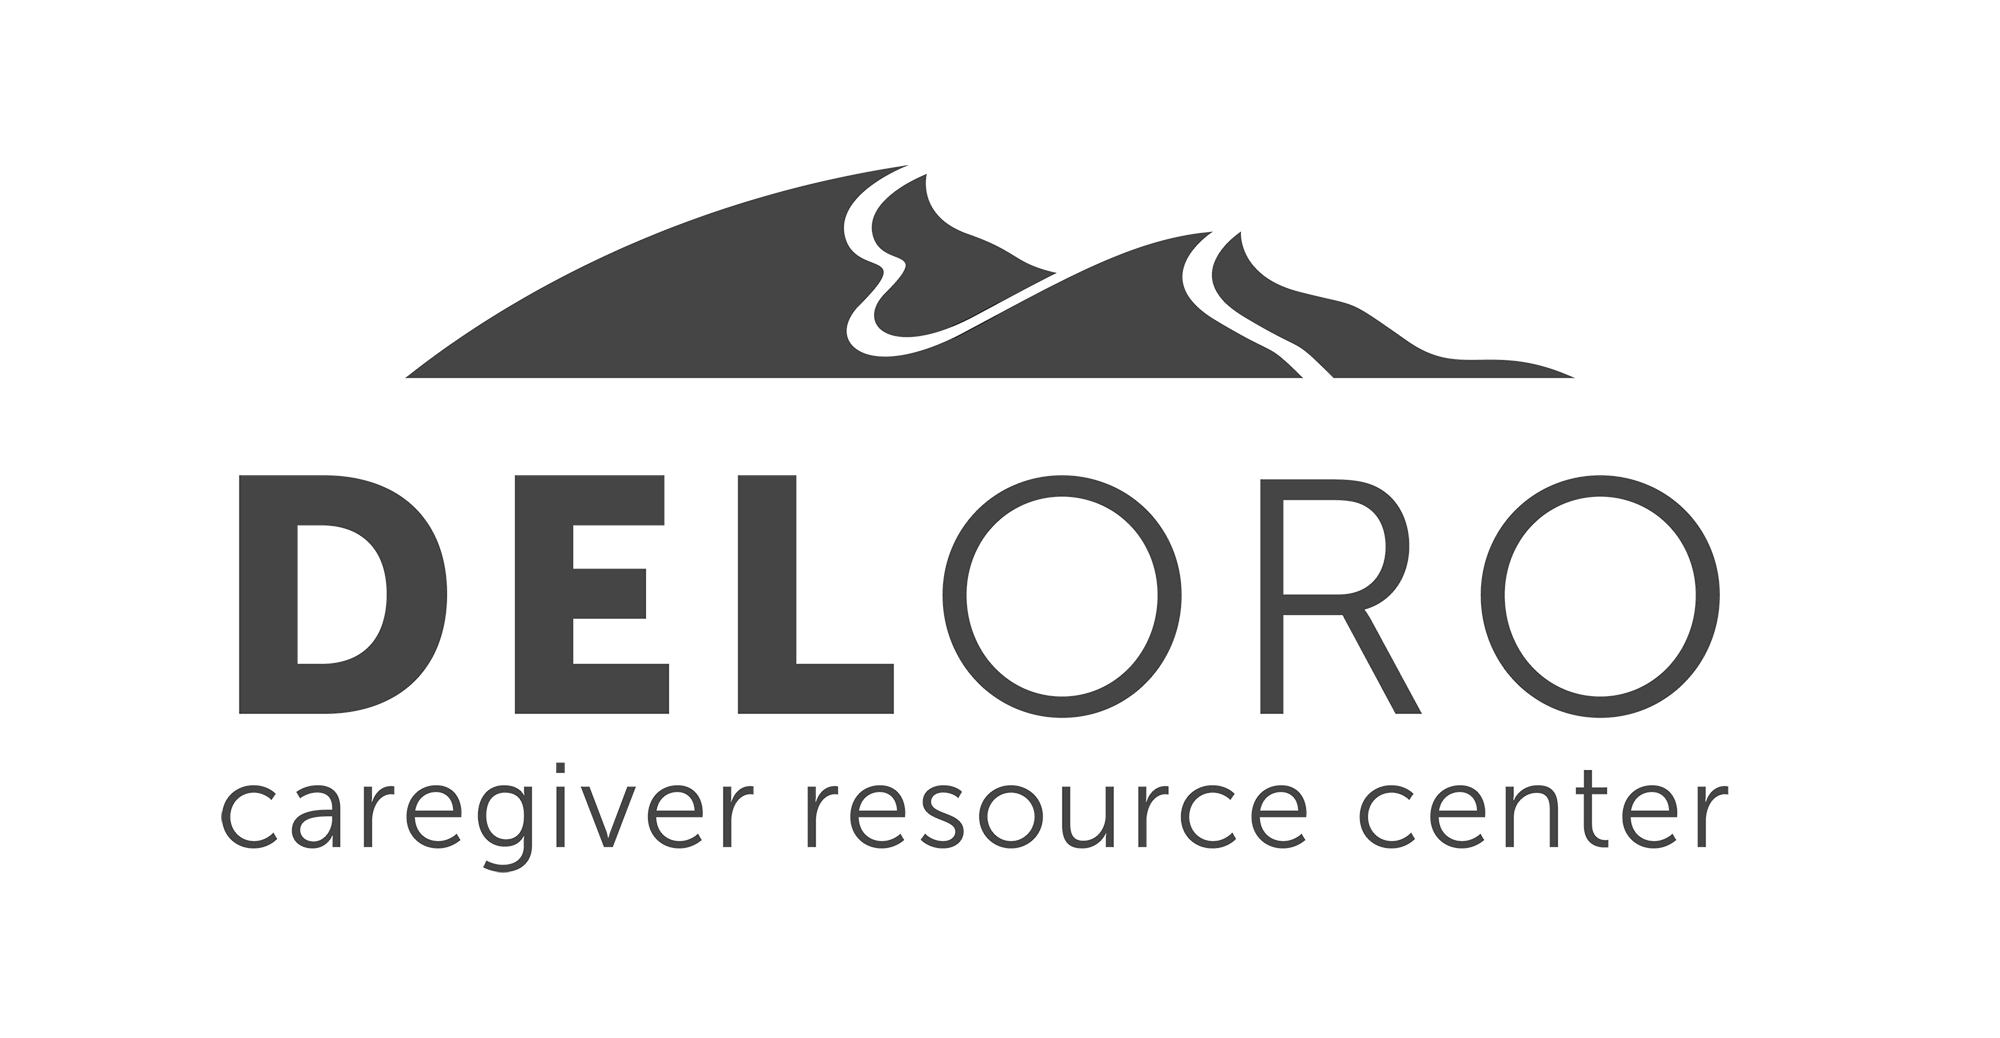 Del Oro Caregiver Resource Center, providing caregiver resources to Sacramento and nearby counties